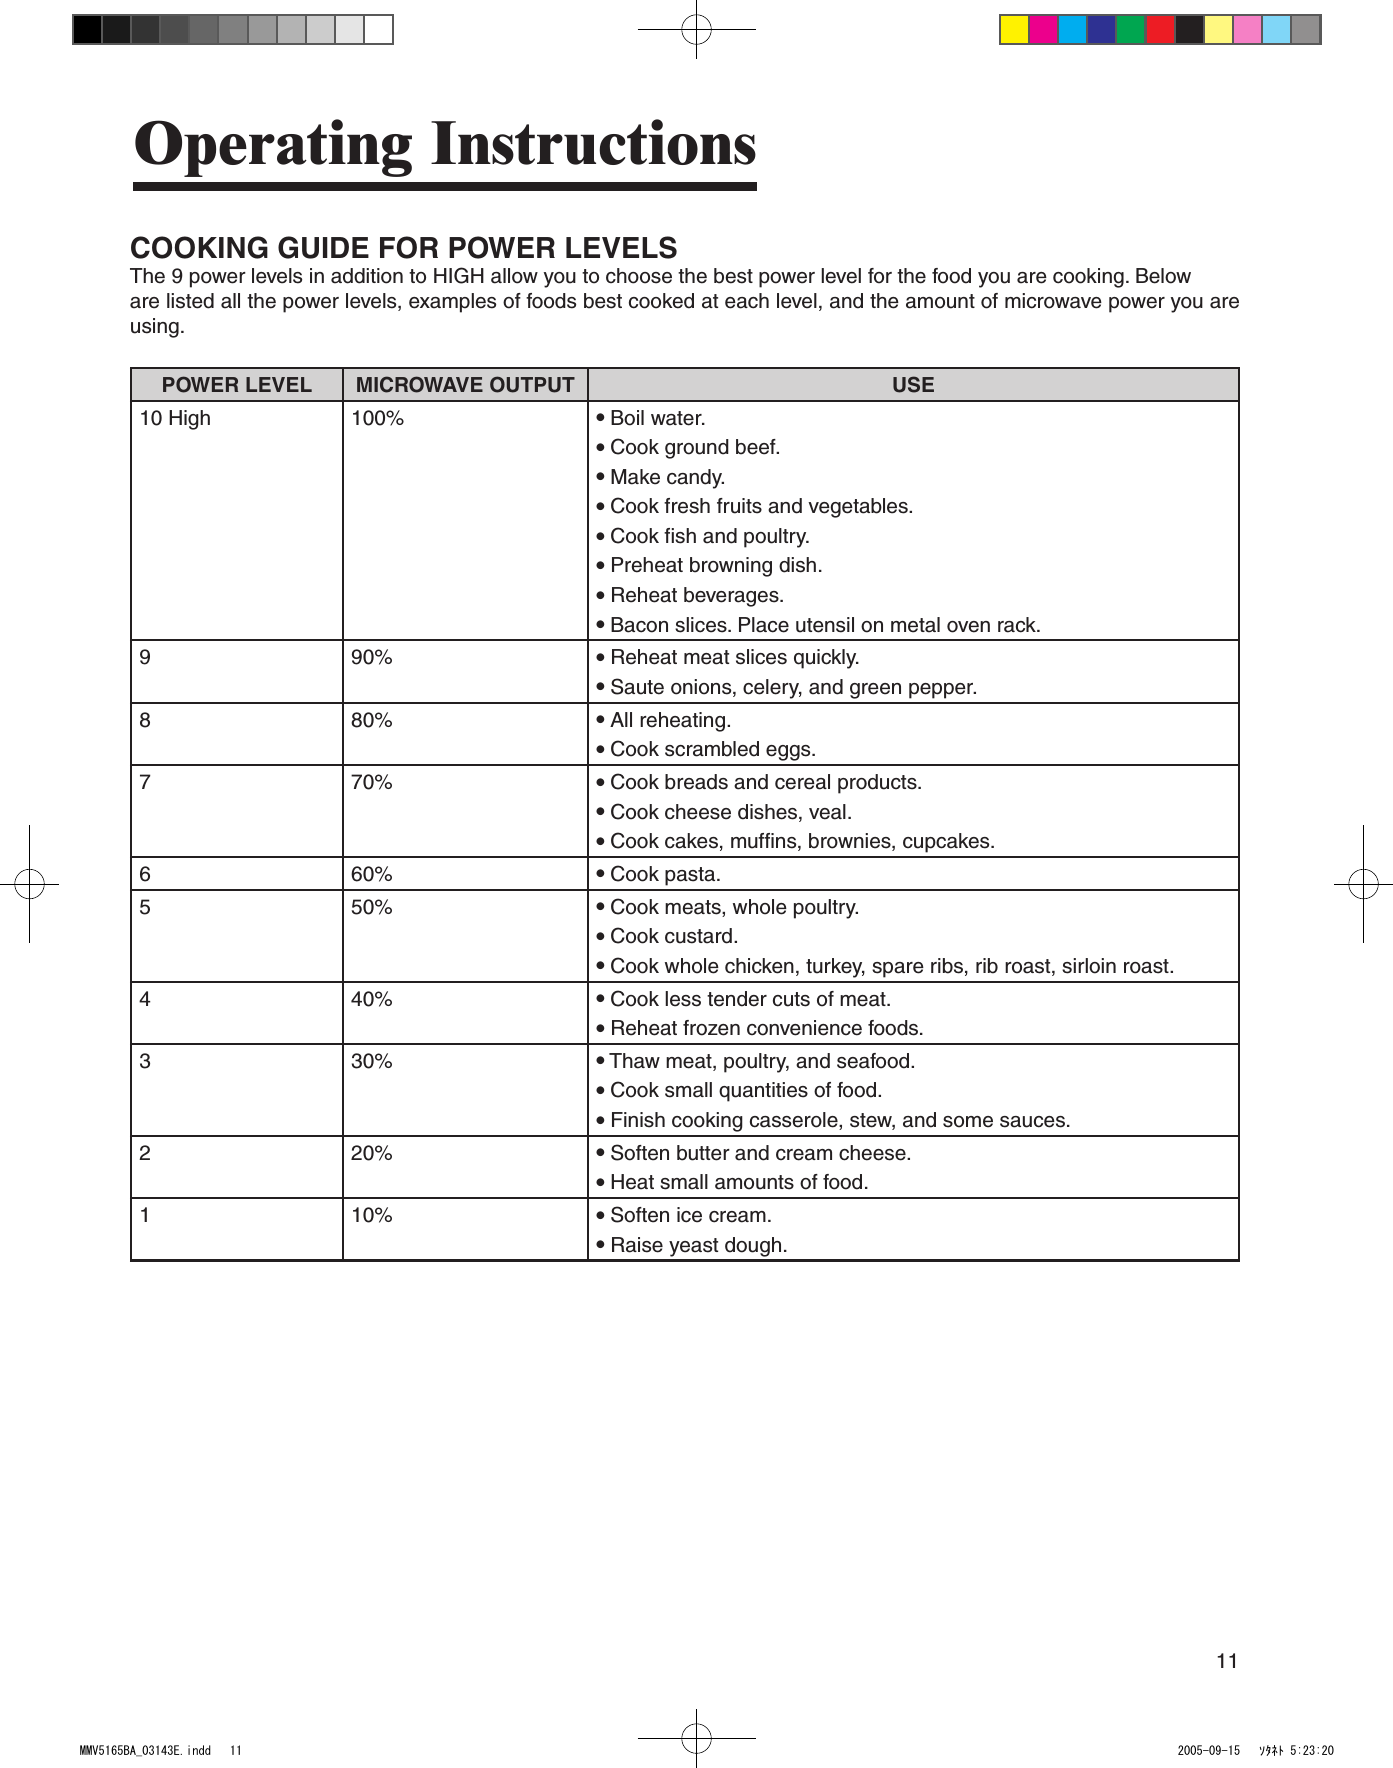 11Operating InstructionsCOOKING GUIDE FOR POWER LEVELSThe 9 power levels in addition to HIGH allow you to choose the best power level for the food you are cooking. Beloware listed all the power levels, examples of foods best cooked at each level, and the amount of microwave power you are using.POWER LEVEL MICROWAVE OUTPUT USE10 High  100%  ● Boil water.● Cook ground beef.● Make candy.● Cook fresh fruits and vegetables.● Cook fish and poultry.● Preheat browning dish.● Reheat beverages.● Bacon slices. Place utensil on metal oven rack.9  90%  ● Reheat meat slices quickly.● Saute onions, celery, and green pepper.8  80%  ● All reheating.● Cook scrambled eggs.7  70%  ● Cook breads and cereal products.● Cook cheese dishes, veal.● Cook cakes, muffins, brownies, cupcakes.6  60%  ● Cook pasta.5  50%  ● Cook meats, whole poultry.● Cook custard.● Cook whole chicken, turkey, spare ribs, rib roast, sirloin roast.4  40%  ● Cook less tender cuts of meat.● Reheat frozen convenience foods.3  30%  ● Thaw meat, poultry, and seafood.● Cook small quantities of food.● Finish cooking casserole, stew, and some sauces.2  20%  ● Soften butter and cream cheese.● Heat small amounts of food.1  10%  ● Soften ice cream.● Raise yeast dough.MMV5165BA_03143E.indd   11 2005-09-15   ｿﾀﾈﾄ 5:23:20